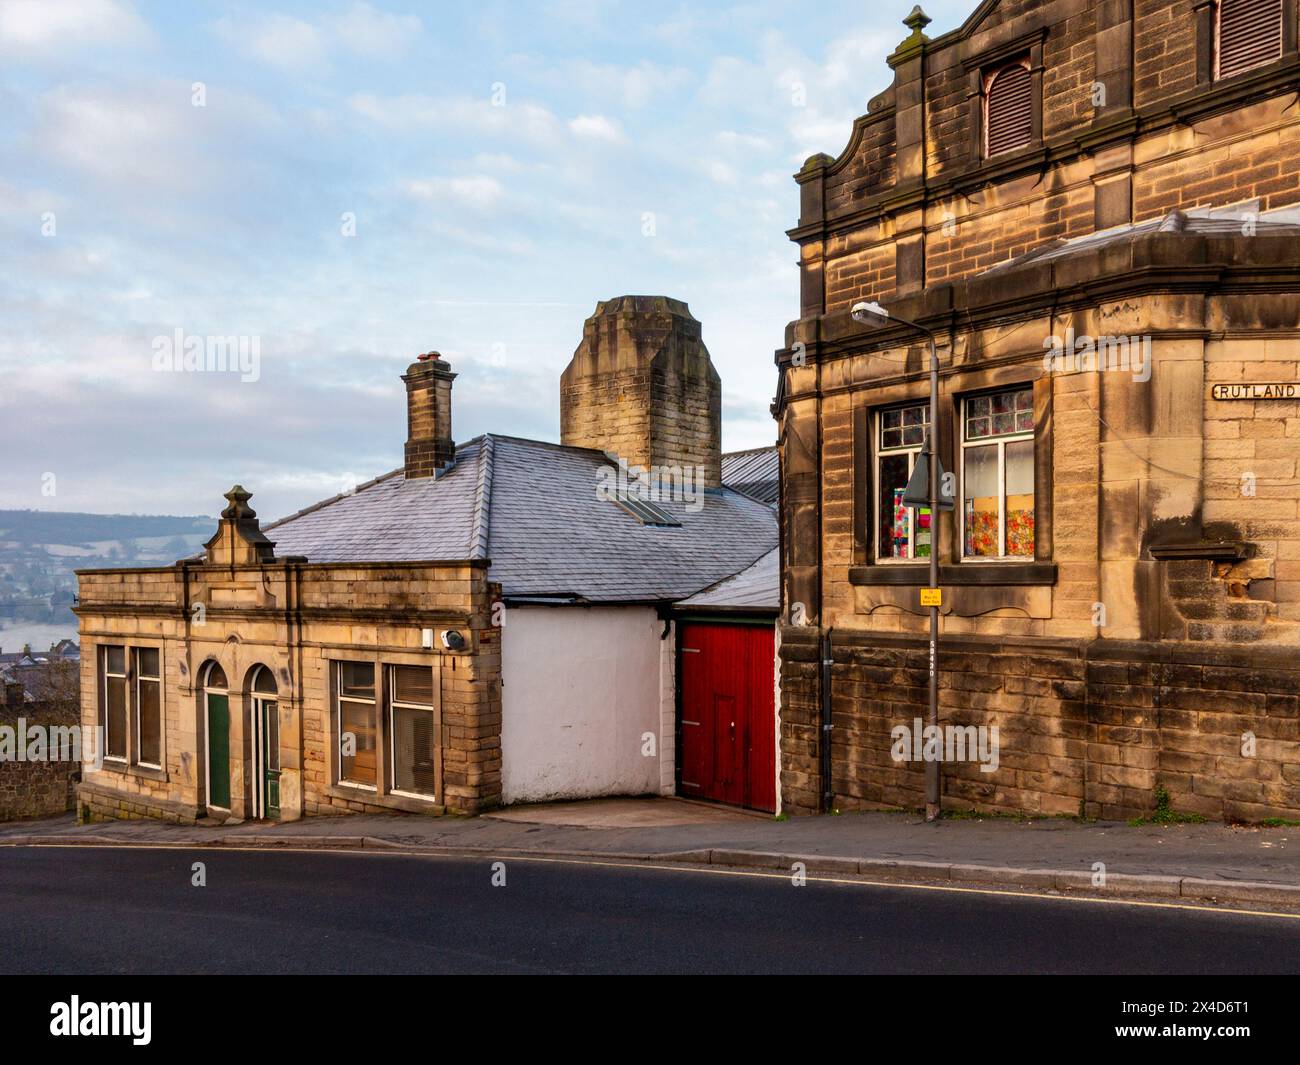 The former offices and depot of the Matlock Cable Tramway in Matlock Derbyshire England UK which operated between 1893 and 1927. Stock Photo